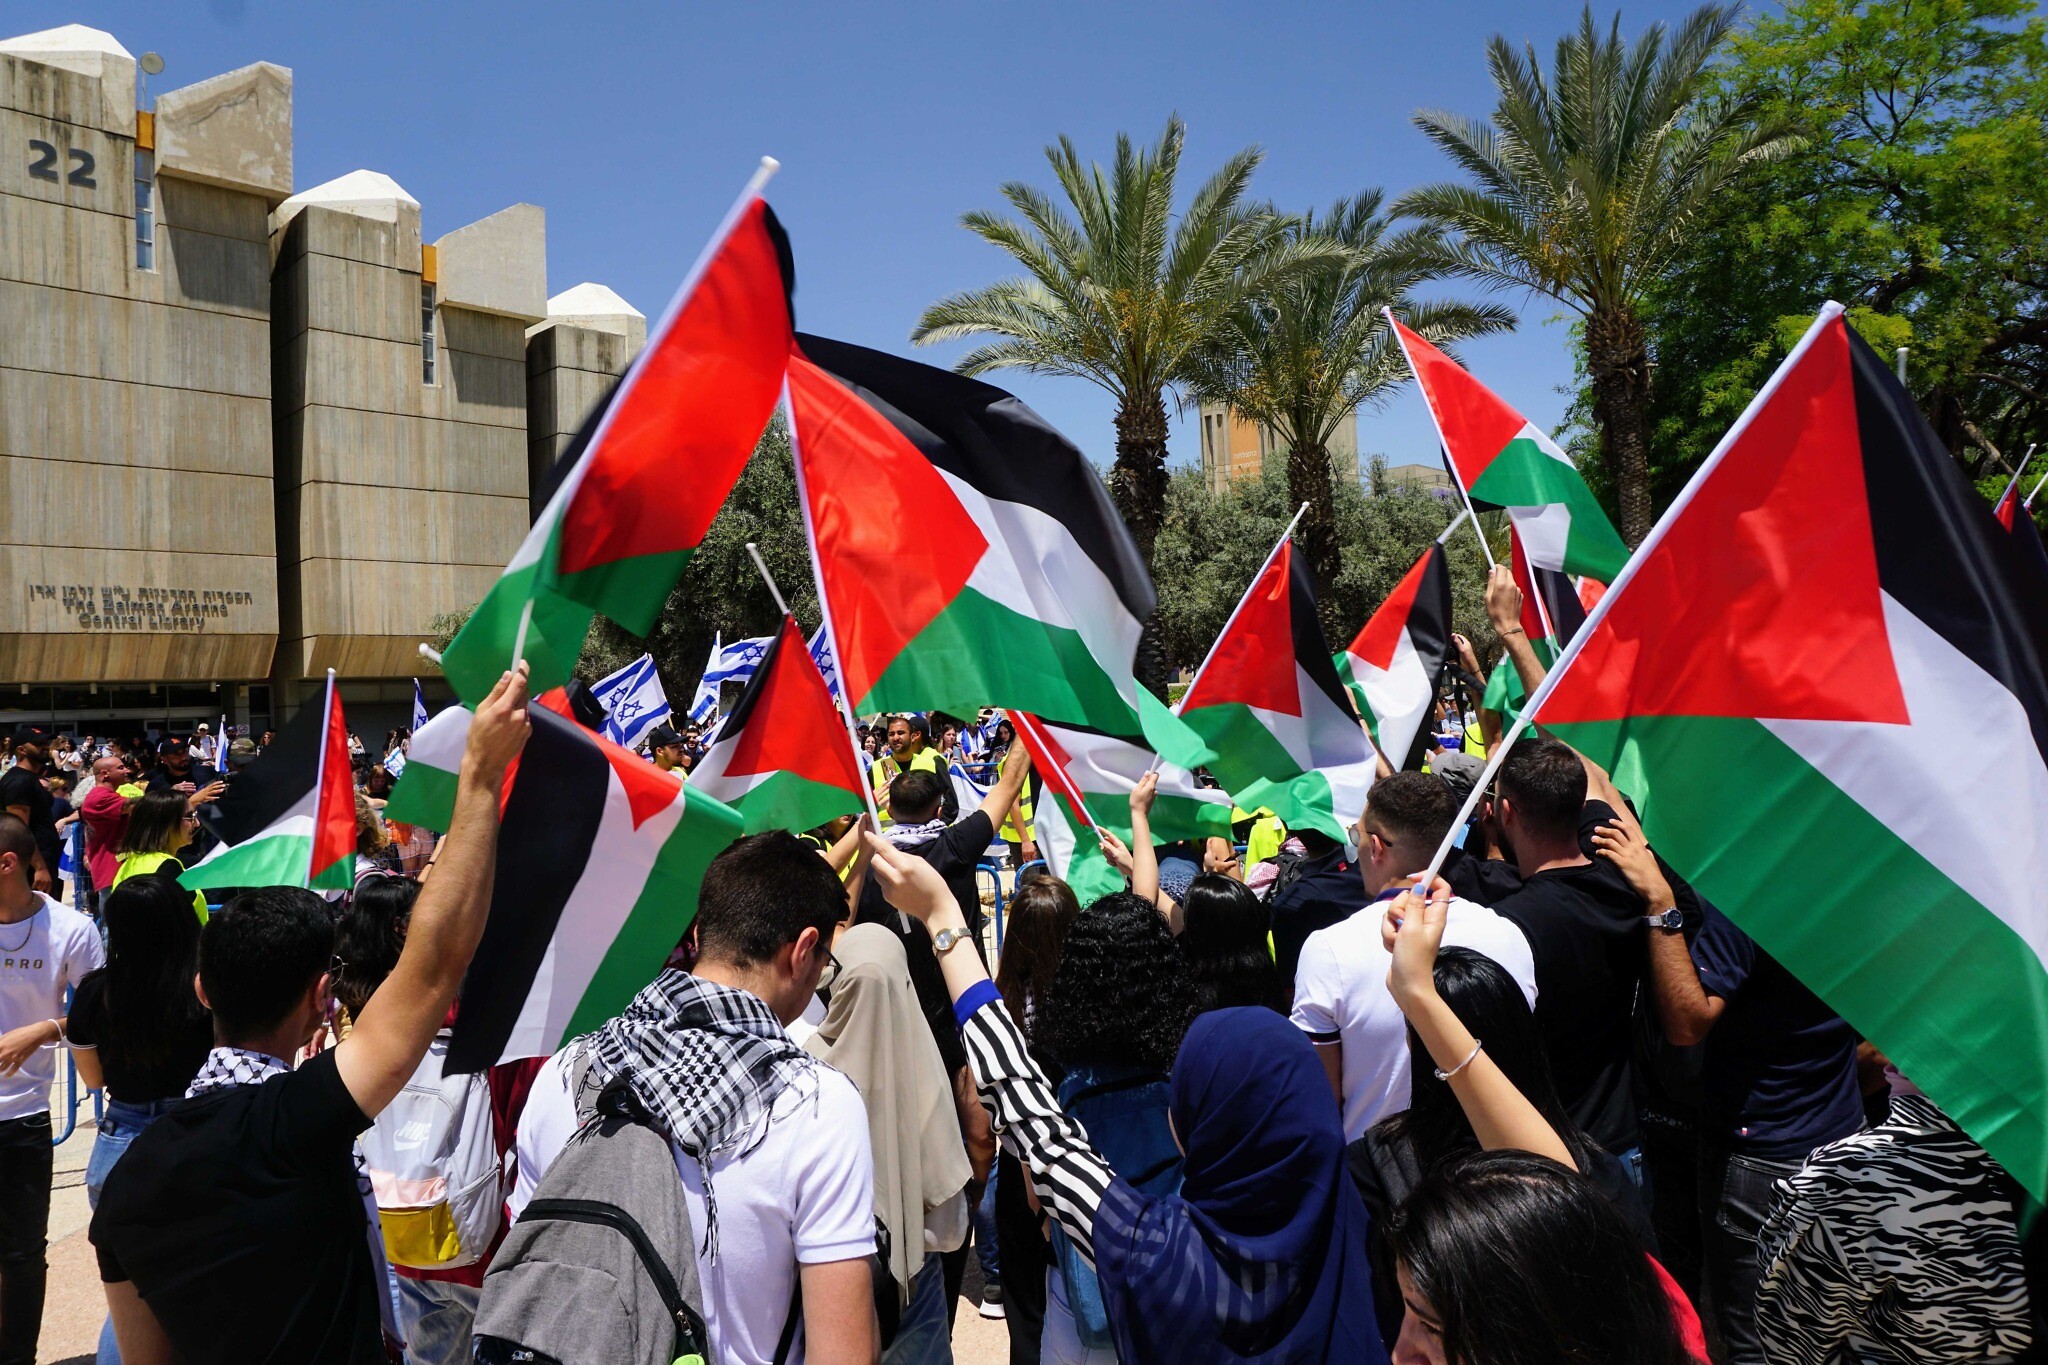 Bill to ban Palestinian flag at state-funded institutions clears